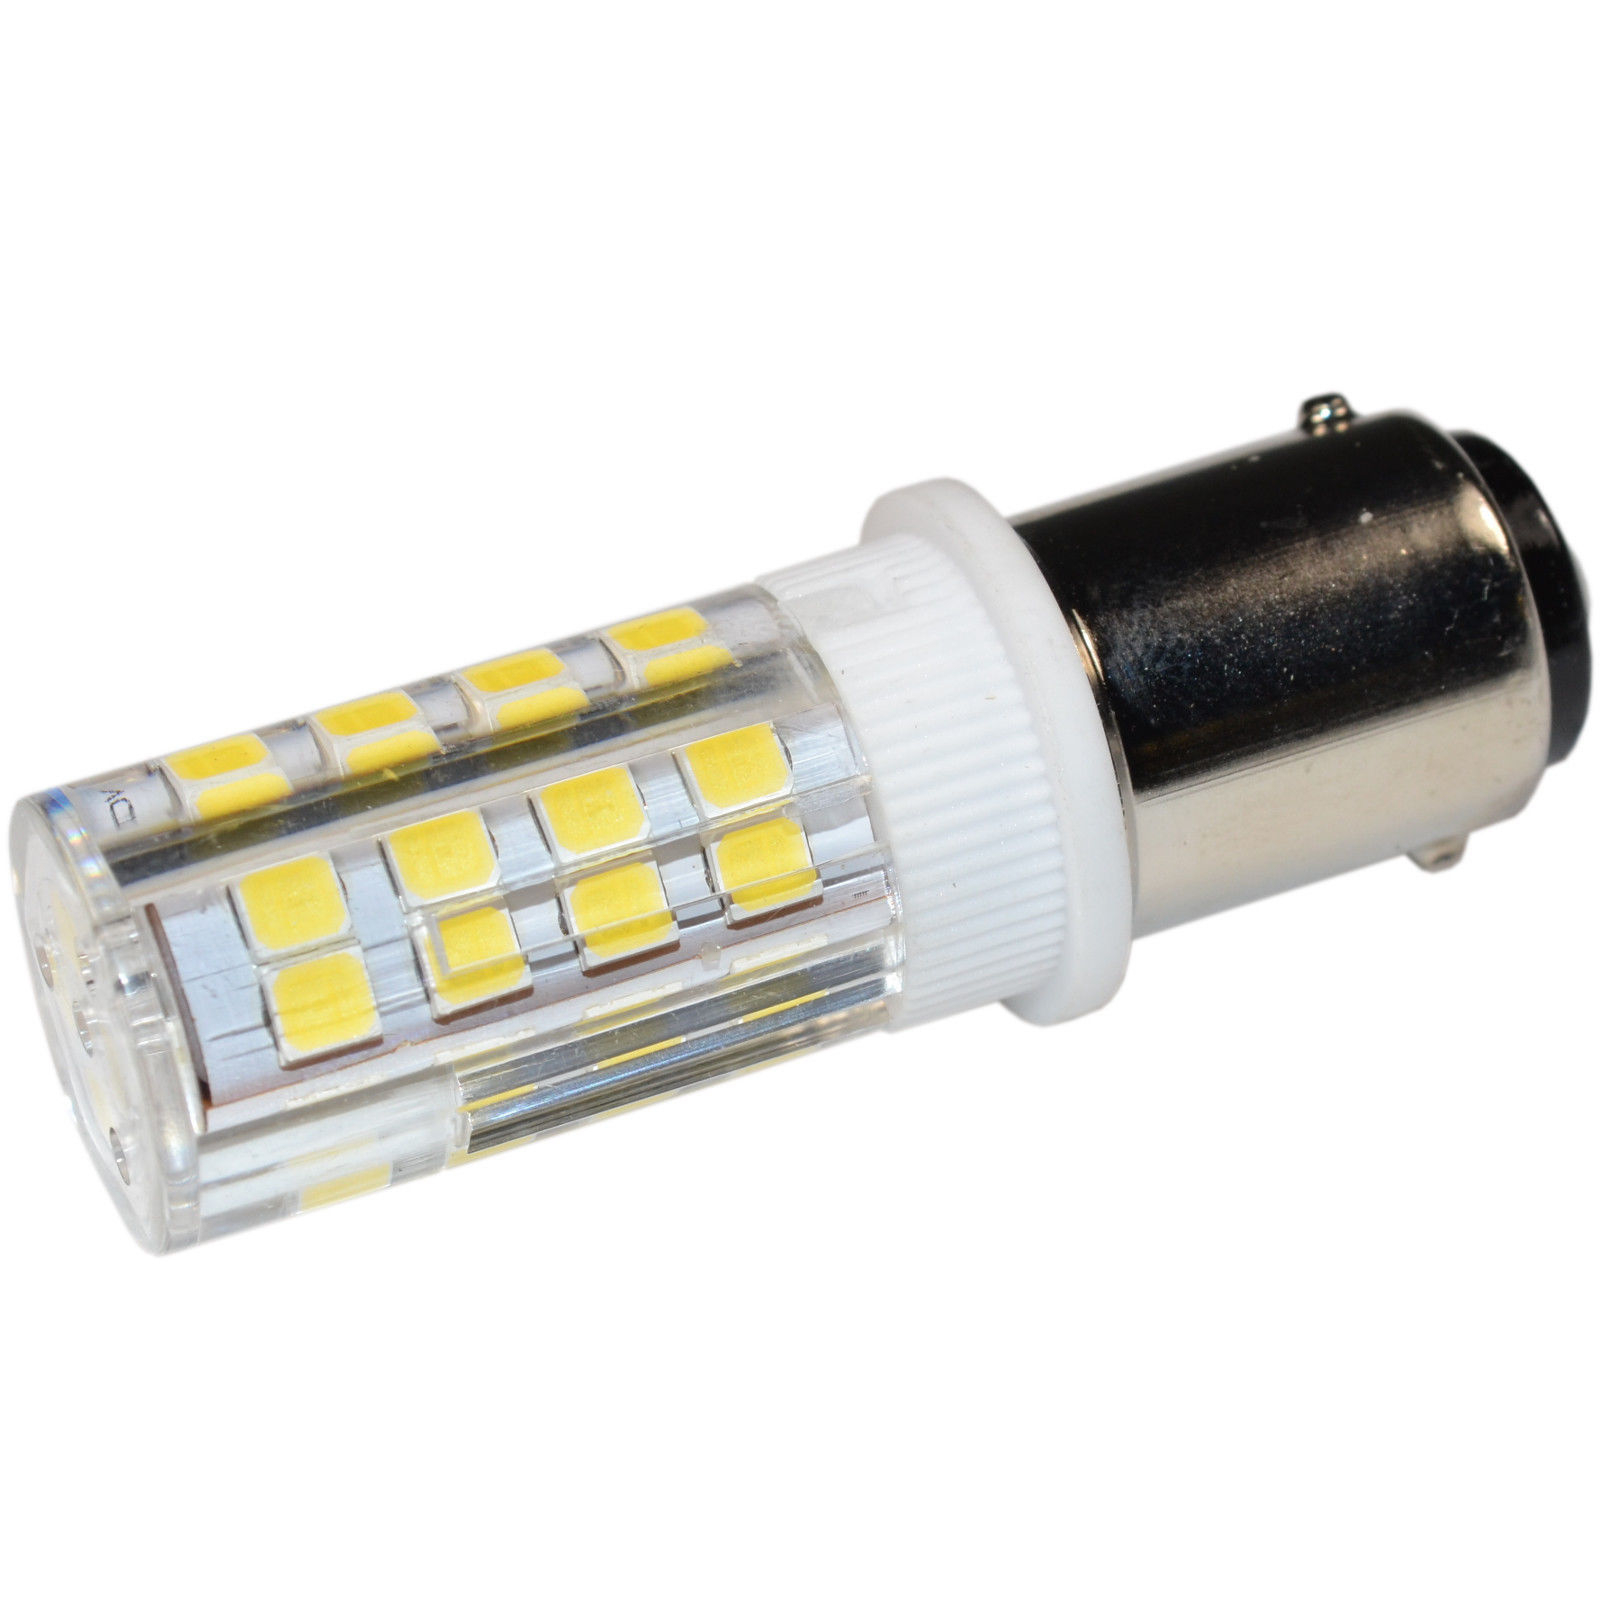 110v Led Light Bulb Ba15d Double Contact Bayonet Base For Singer intended for dimensions 1600 X 1600